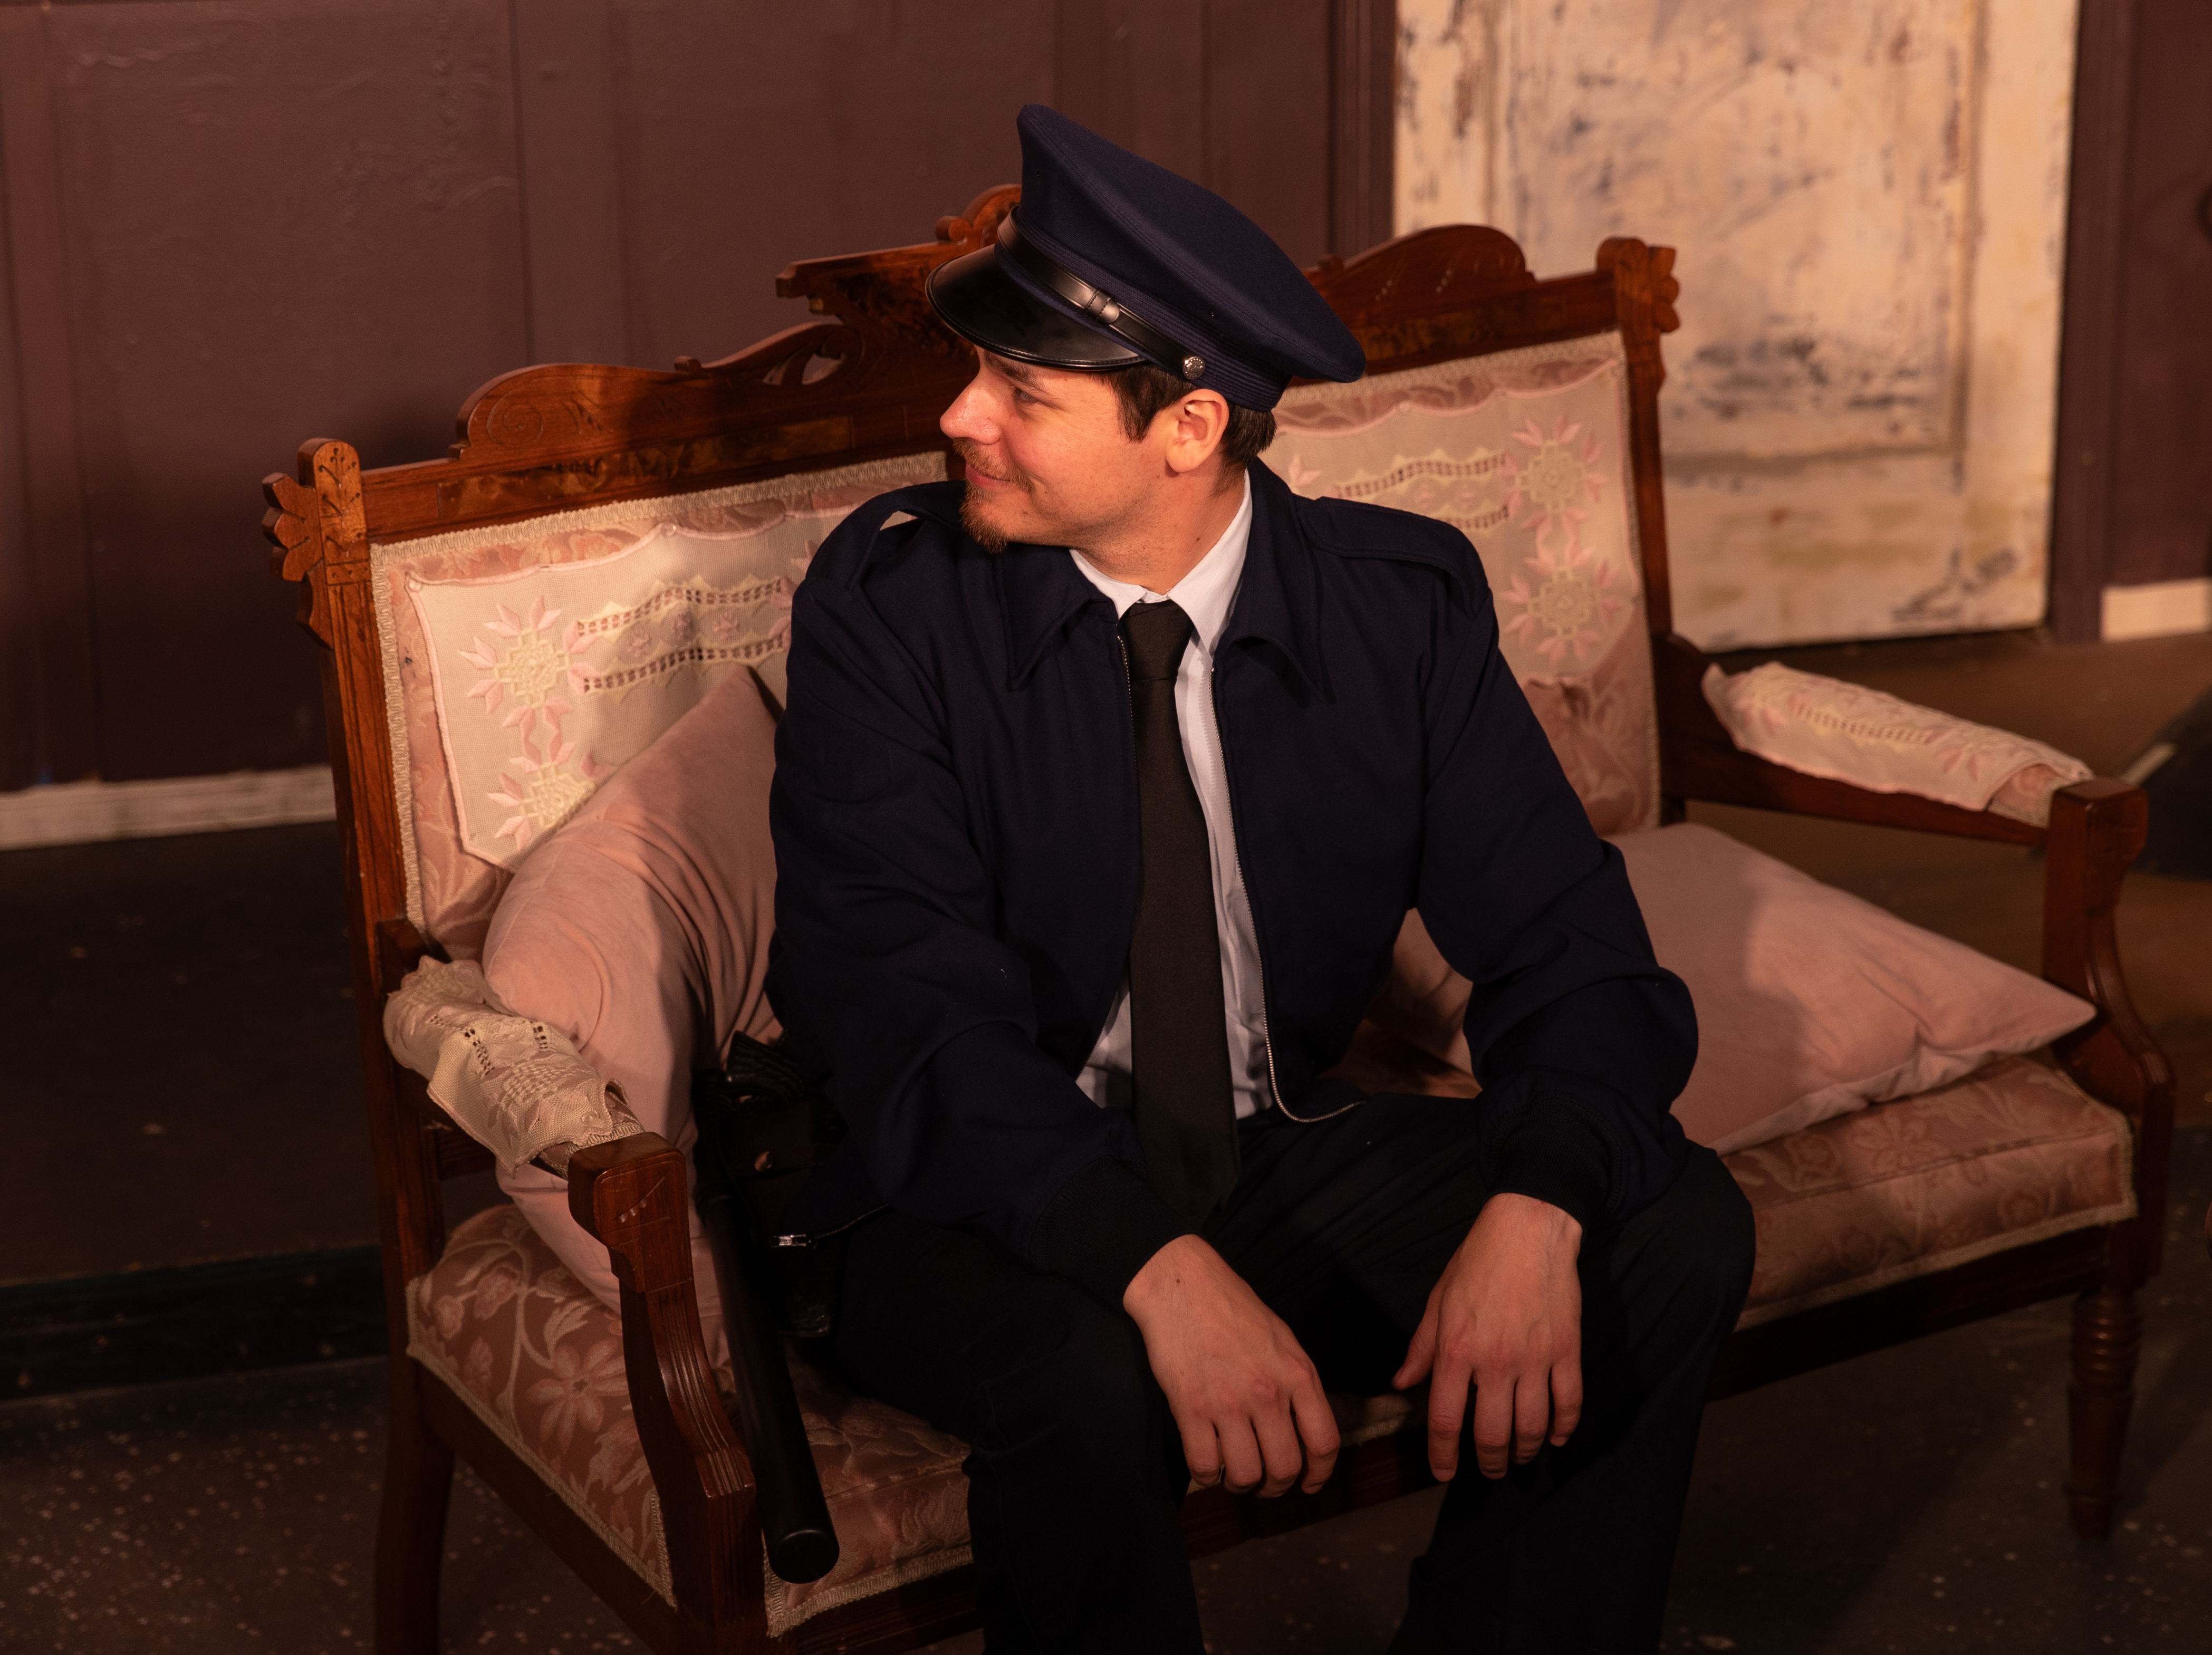 Shawn Eby as OFFICER KLEIN